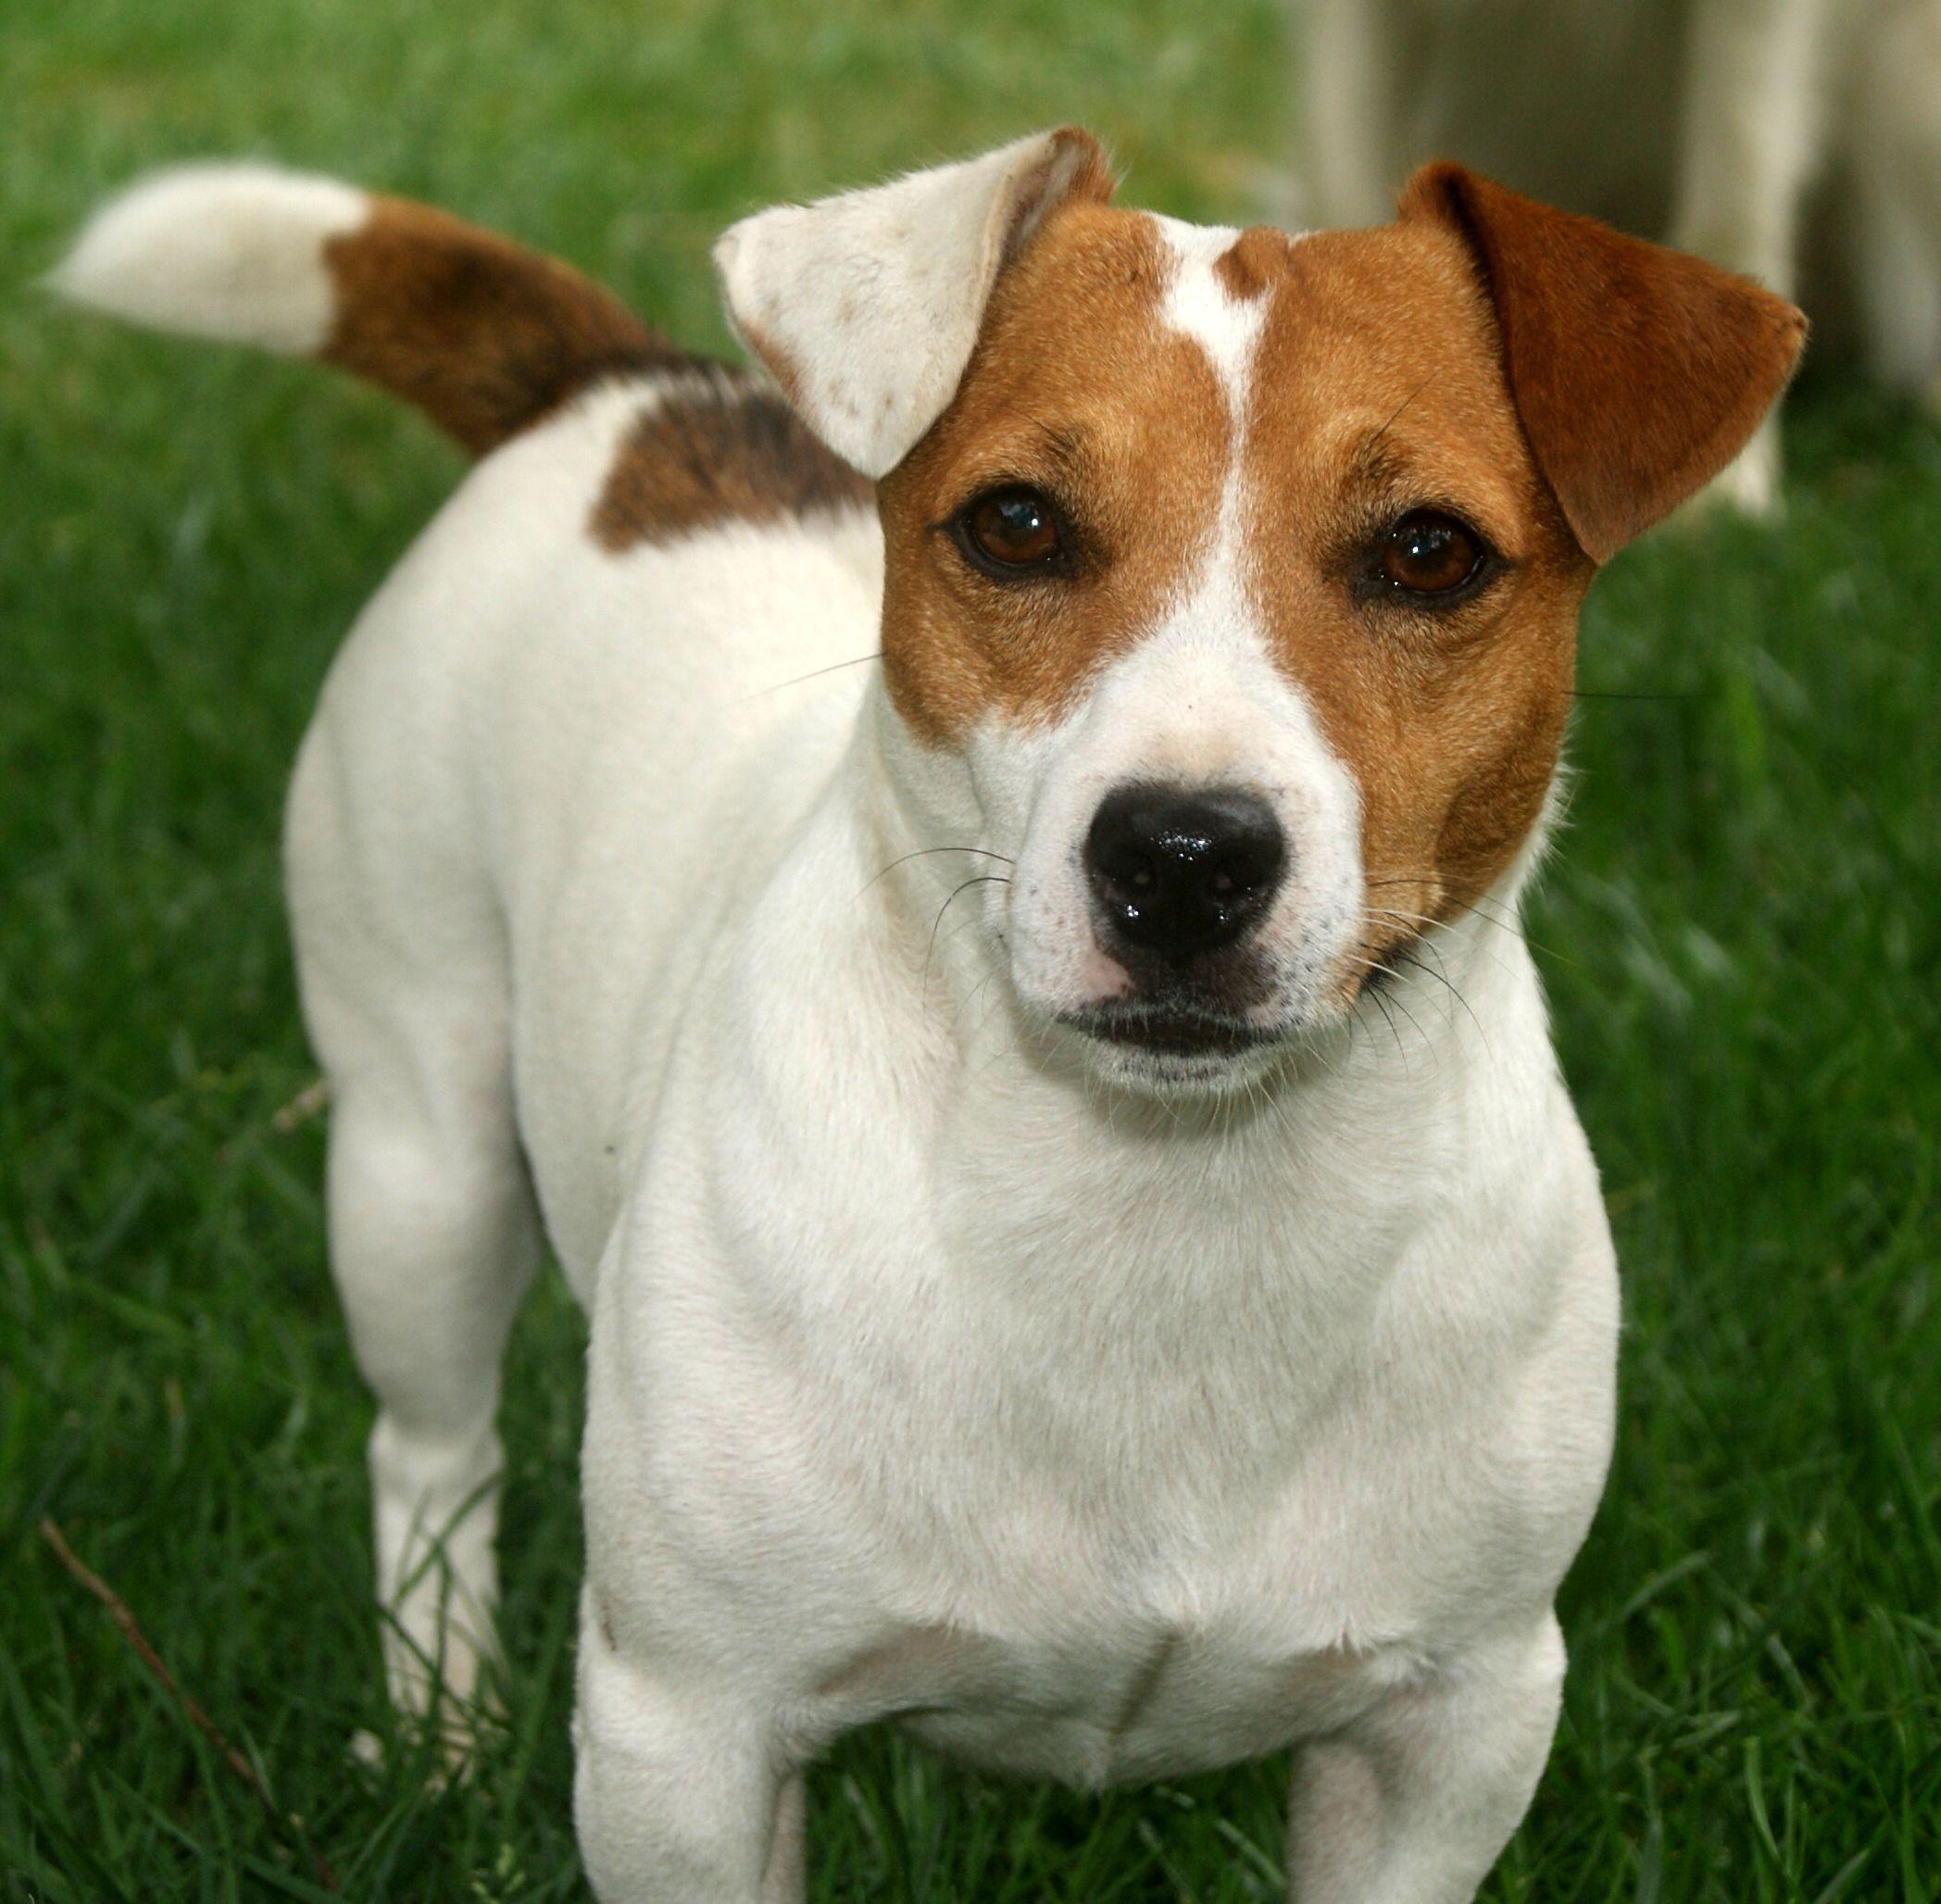 Lovely Jack Russell Terrier dog photo and wallpaper. Beautiful